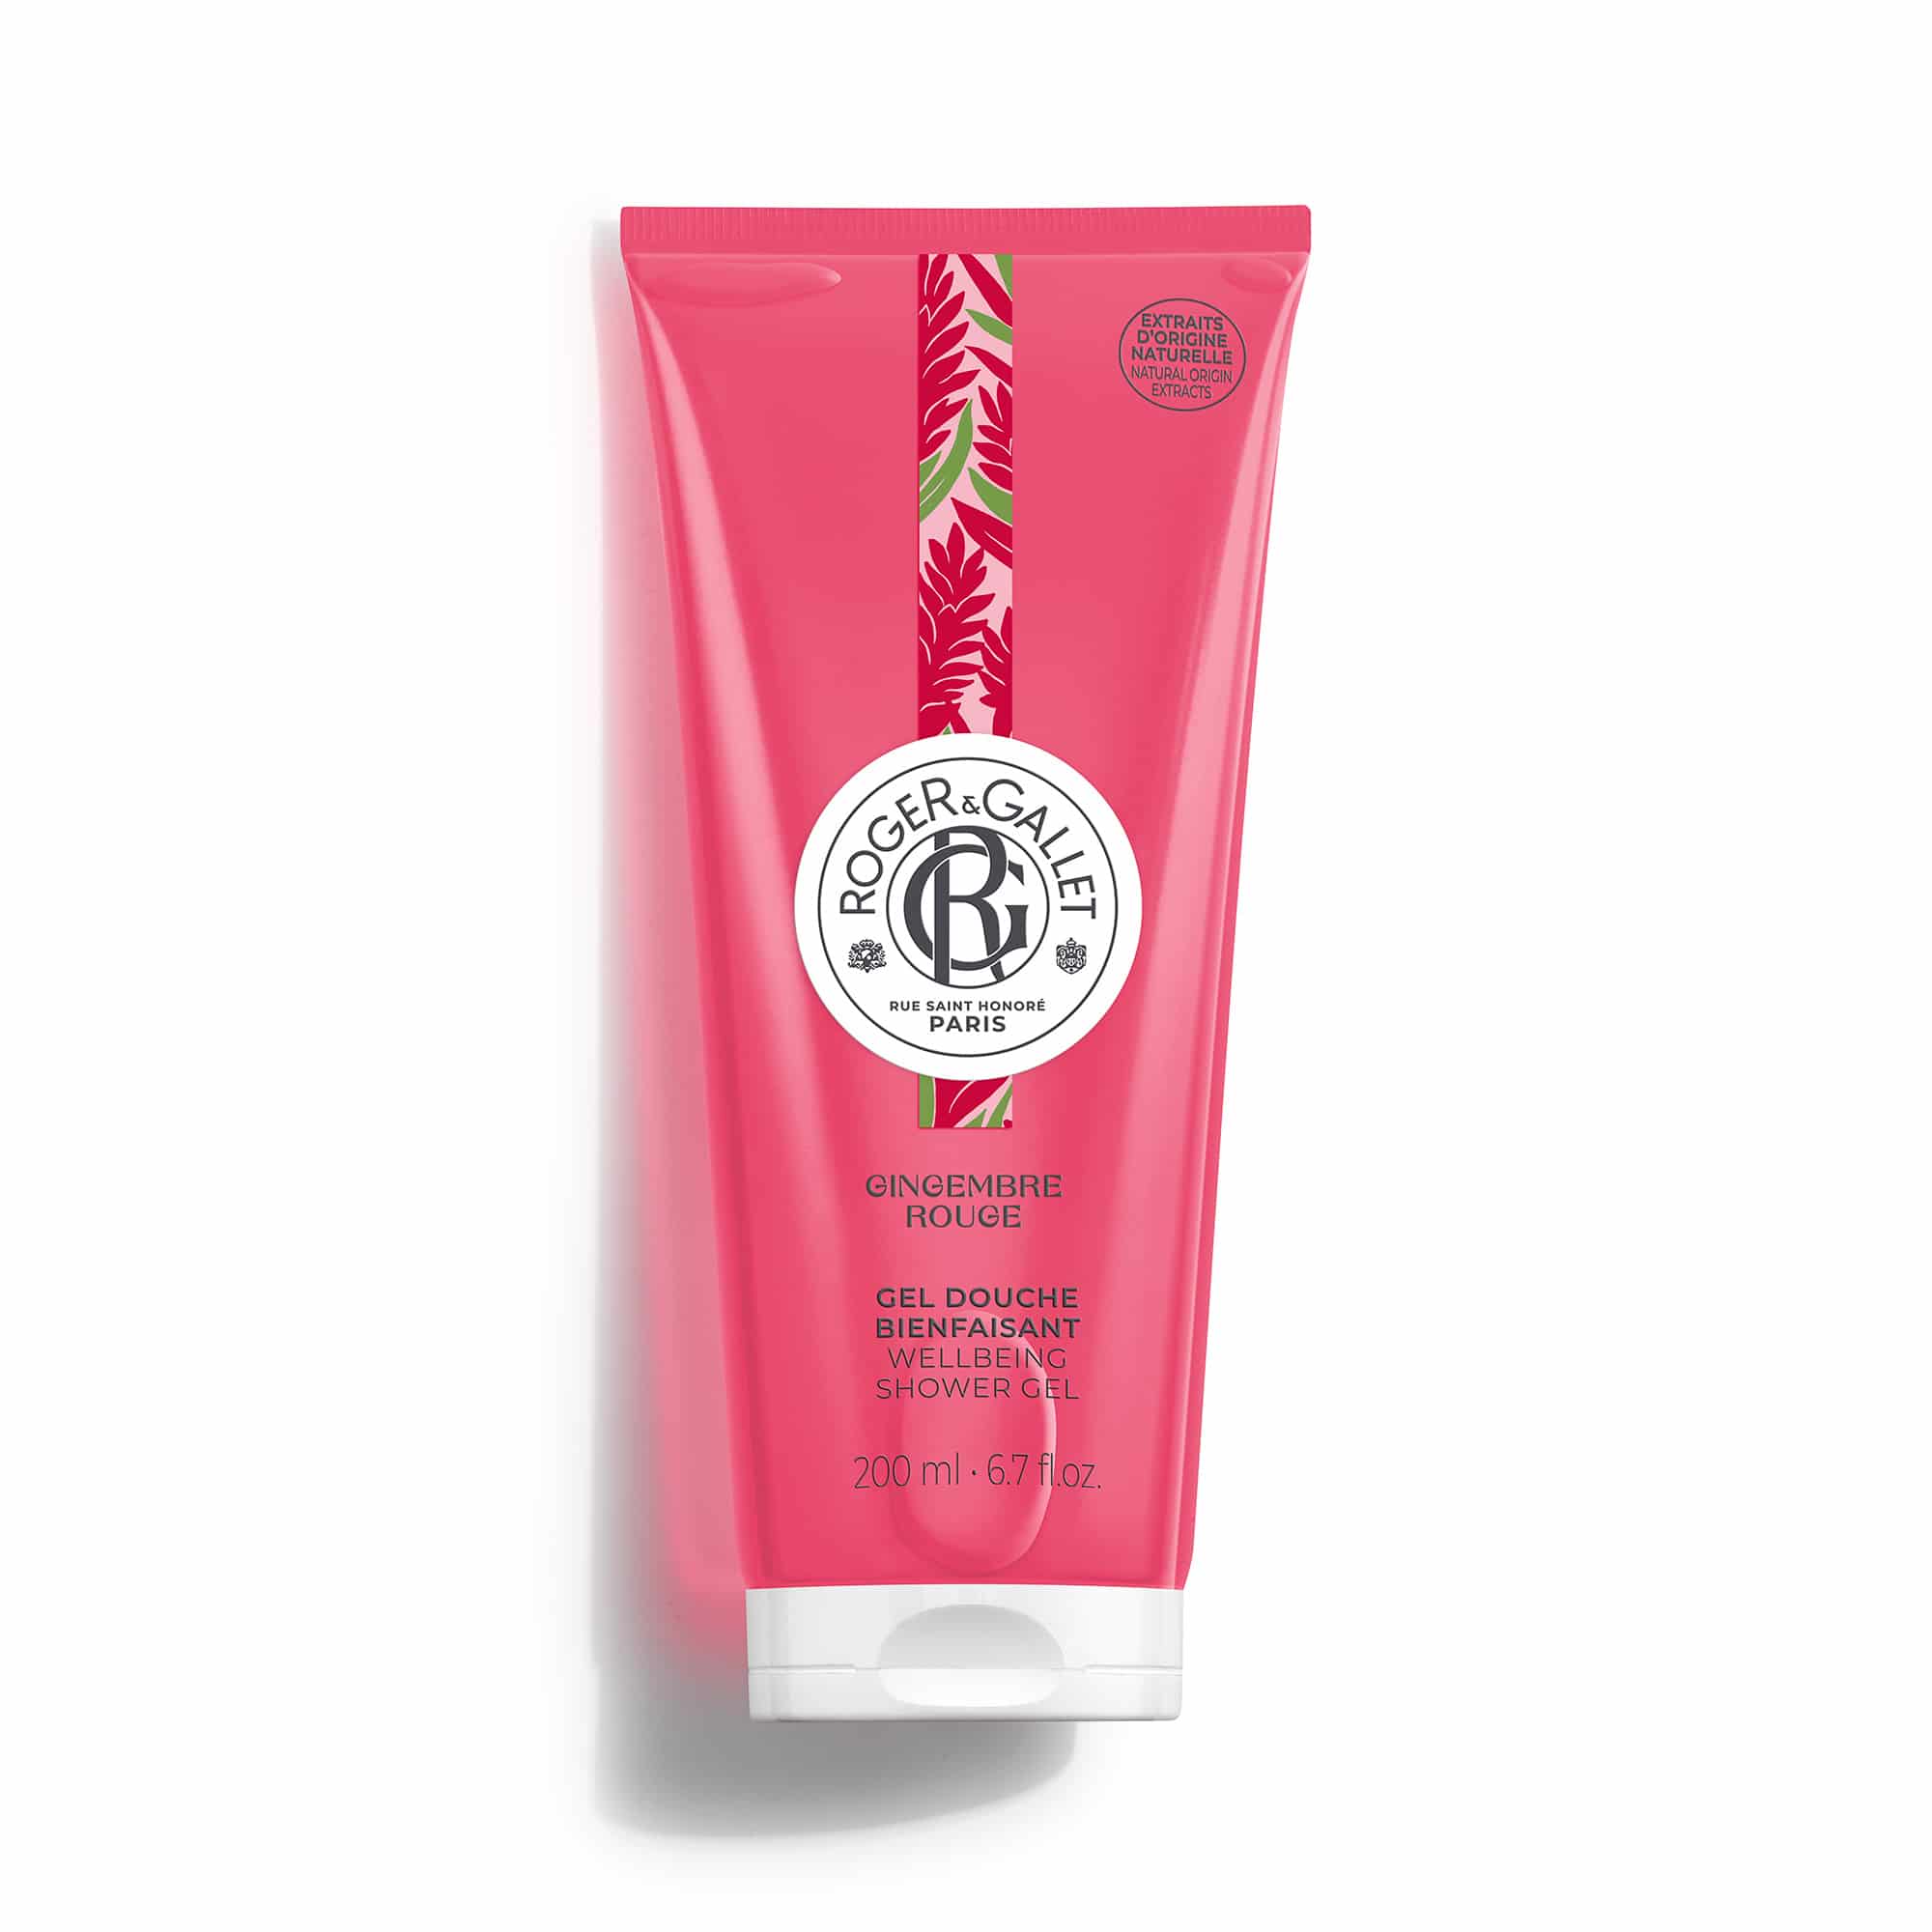 Roger&gallet Gingembre Rouge Gel Douche 200ml